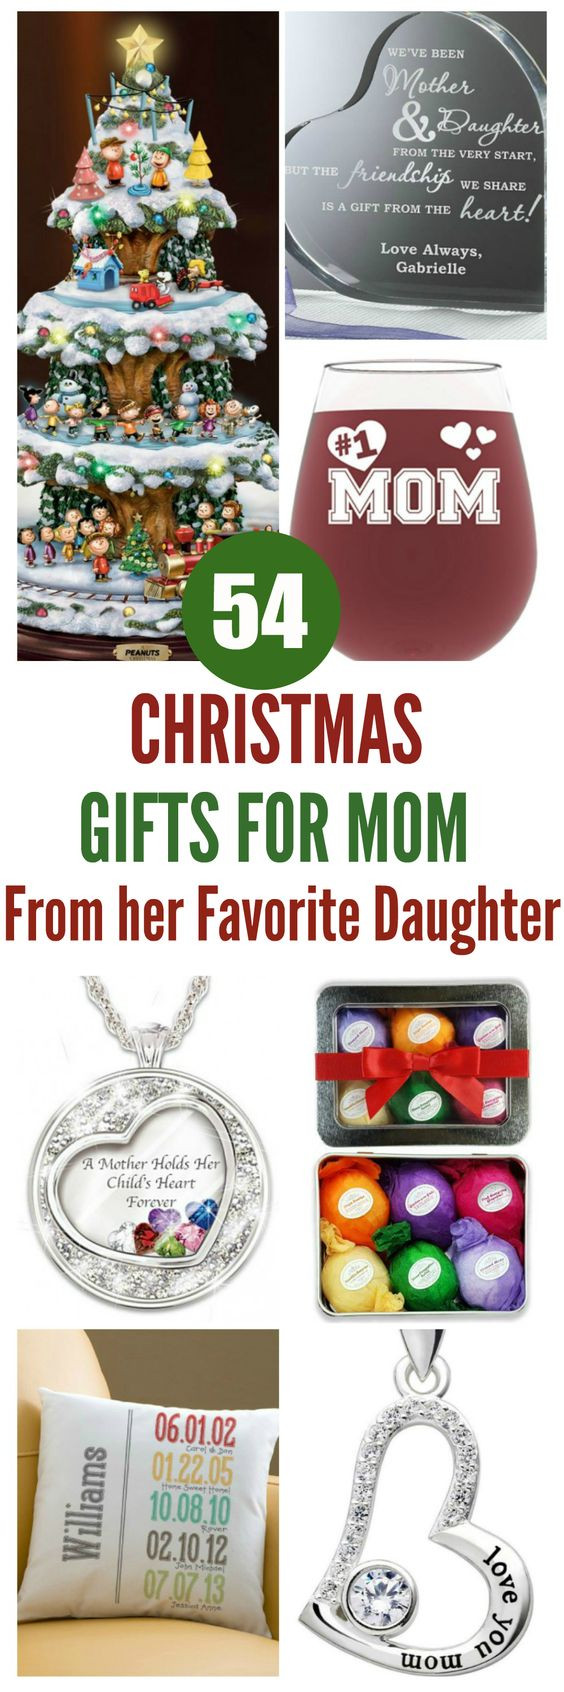 Christmas Gift Ideas For Mother
 Gifts for Mom from Her Daughter Top 60 Gifts